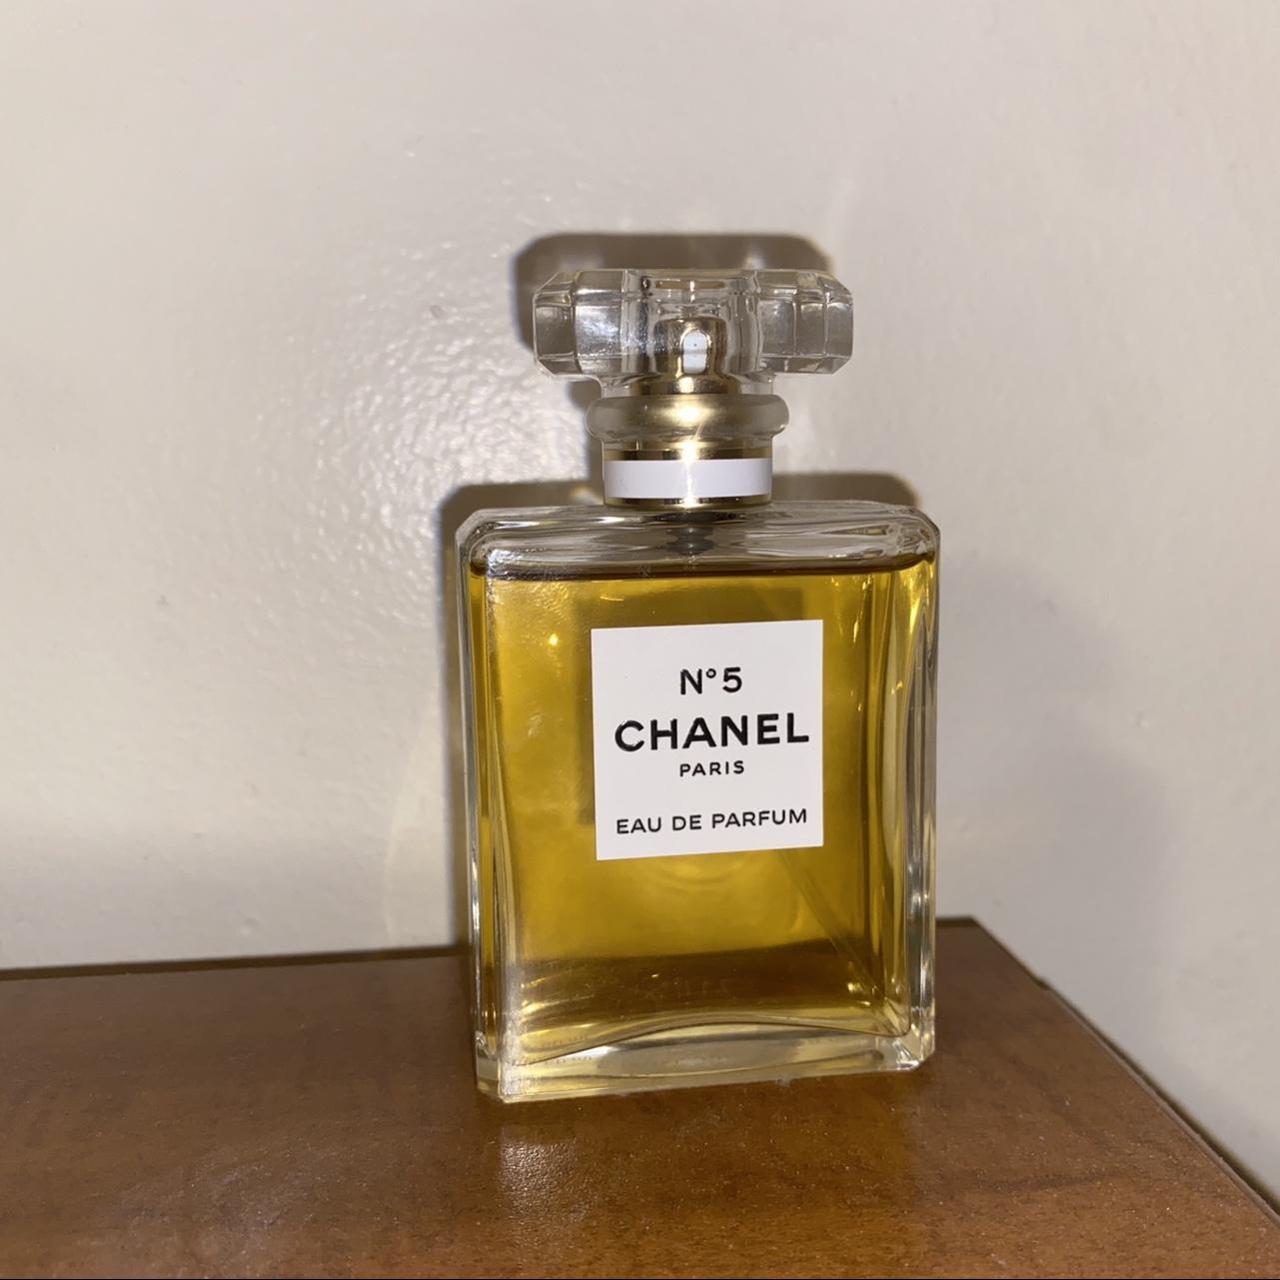 Chanel No. 5 perfume, 1.7 Fl Oz. Only used 3-4